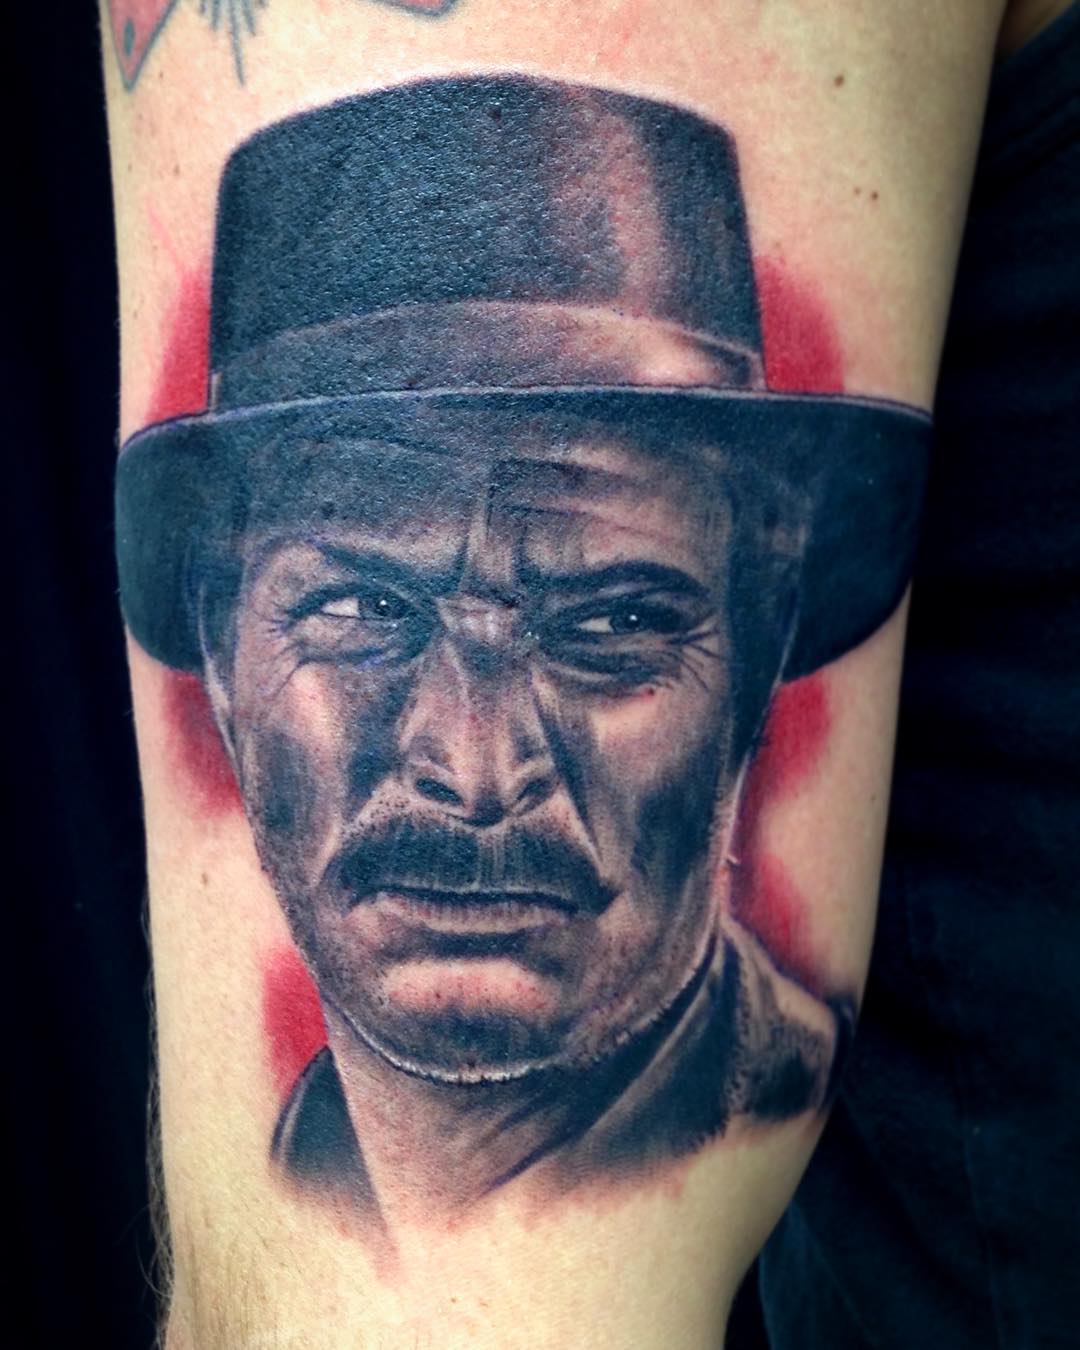 Another one done @royaltattoodk 
Fun start on a "The Good, the Bad and the Ugly"...